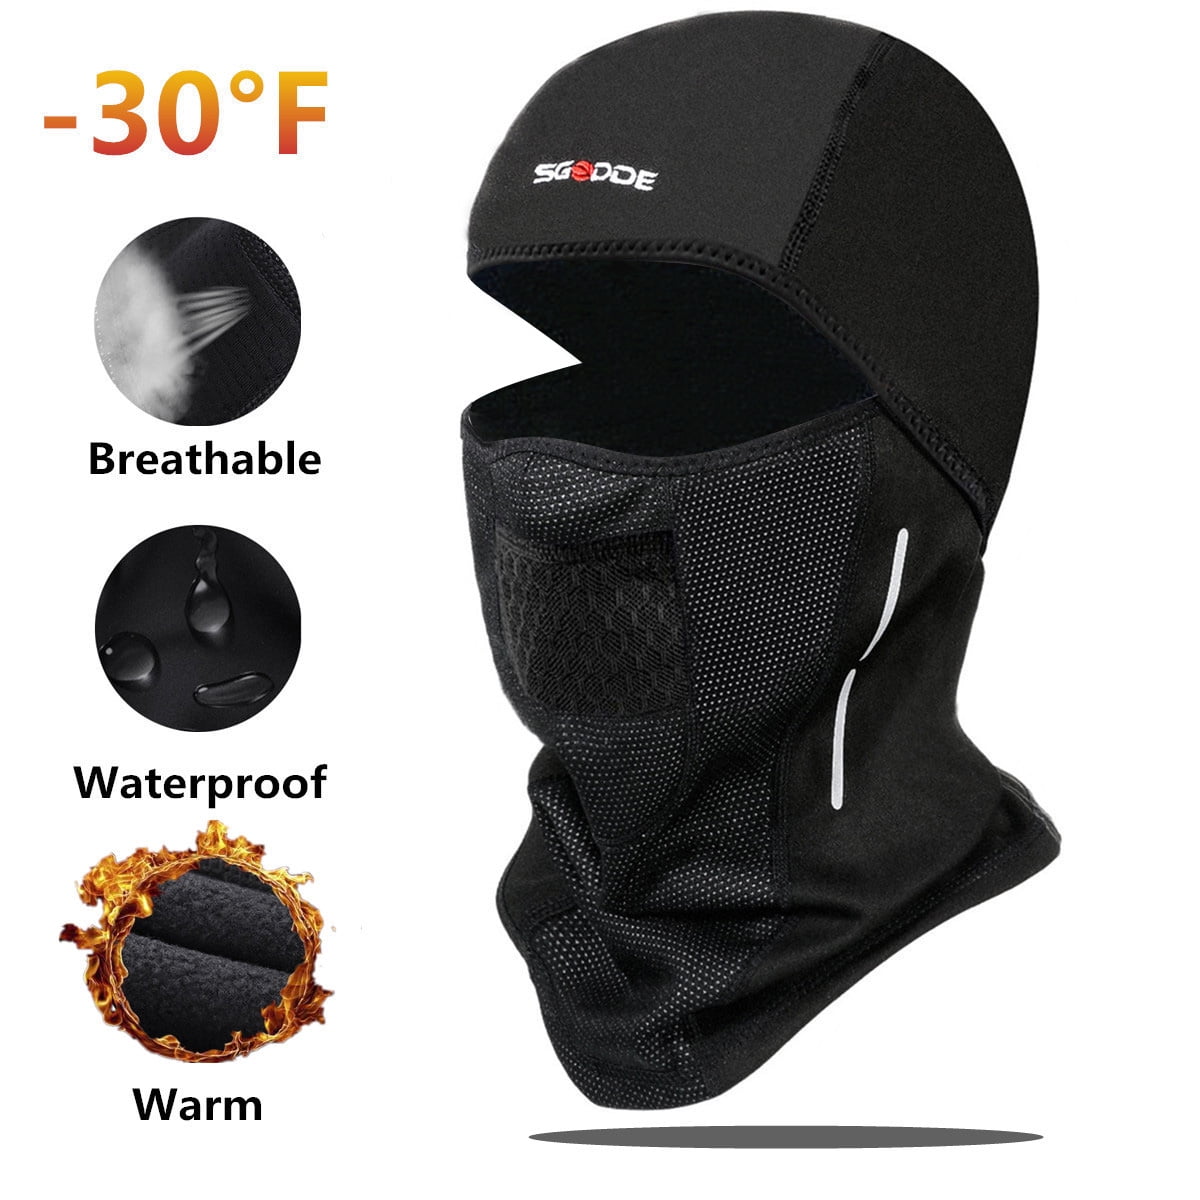 Windproof and Warmer Fleece Cold Weather Face Mask in Winter for Skiing Snowboarding Motorcycling Balaclava Ski Mask 